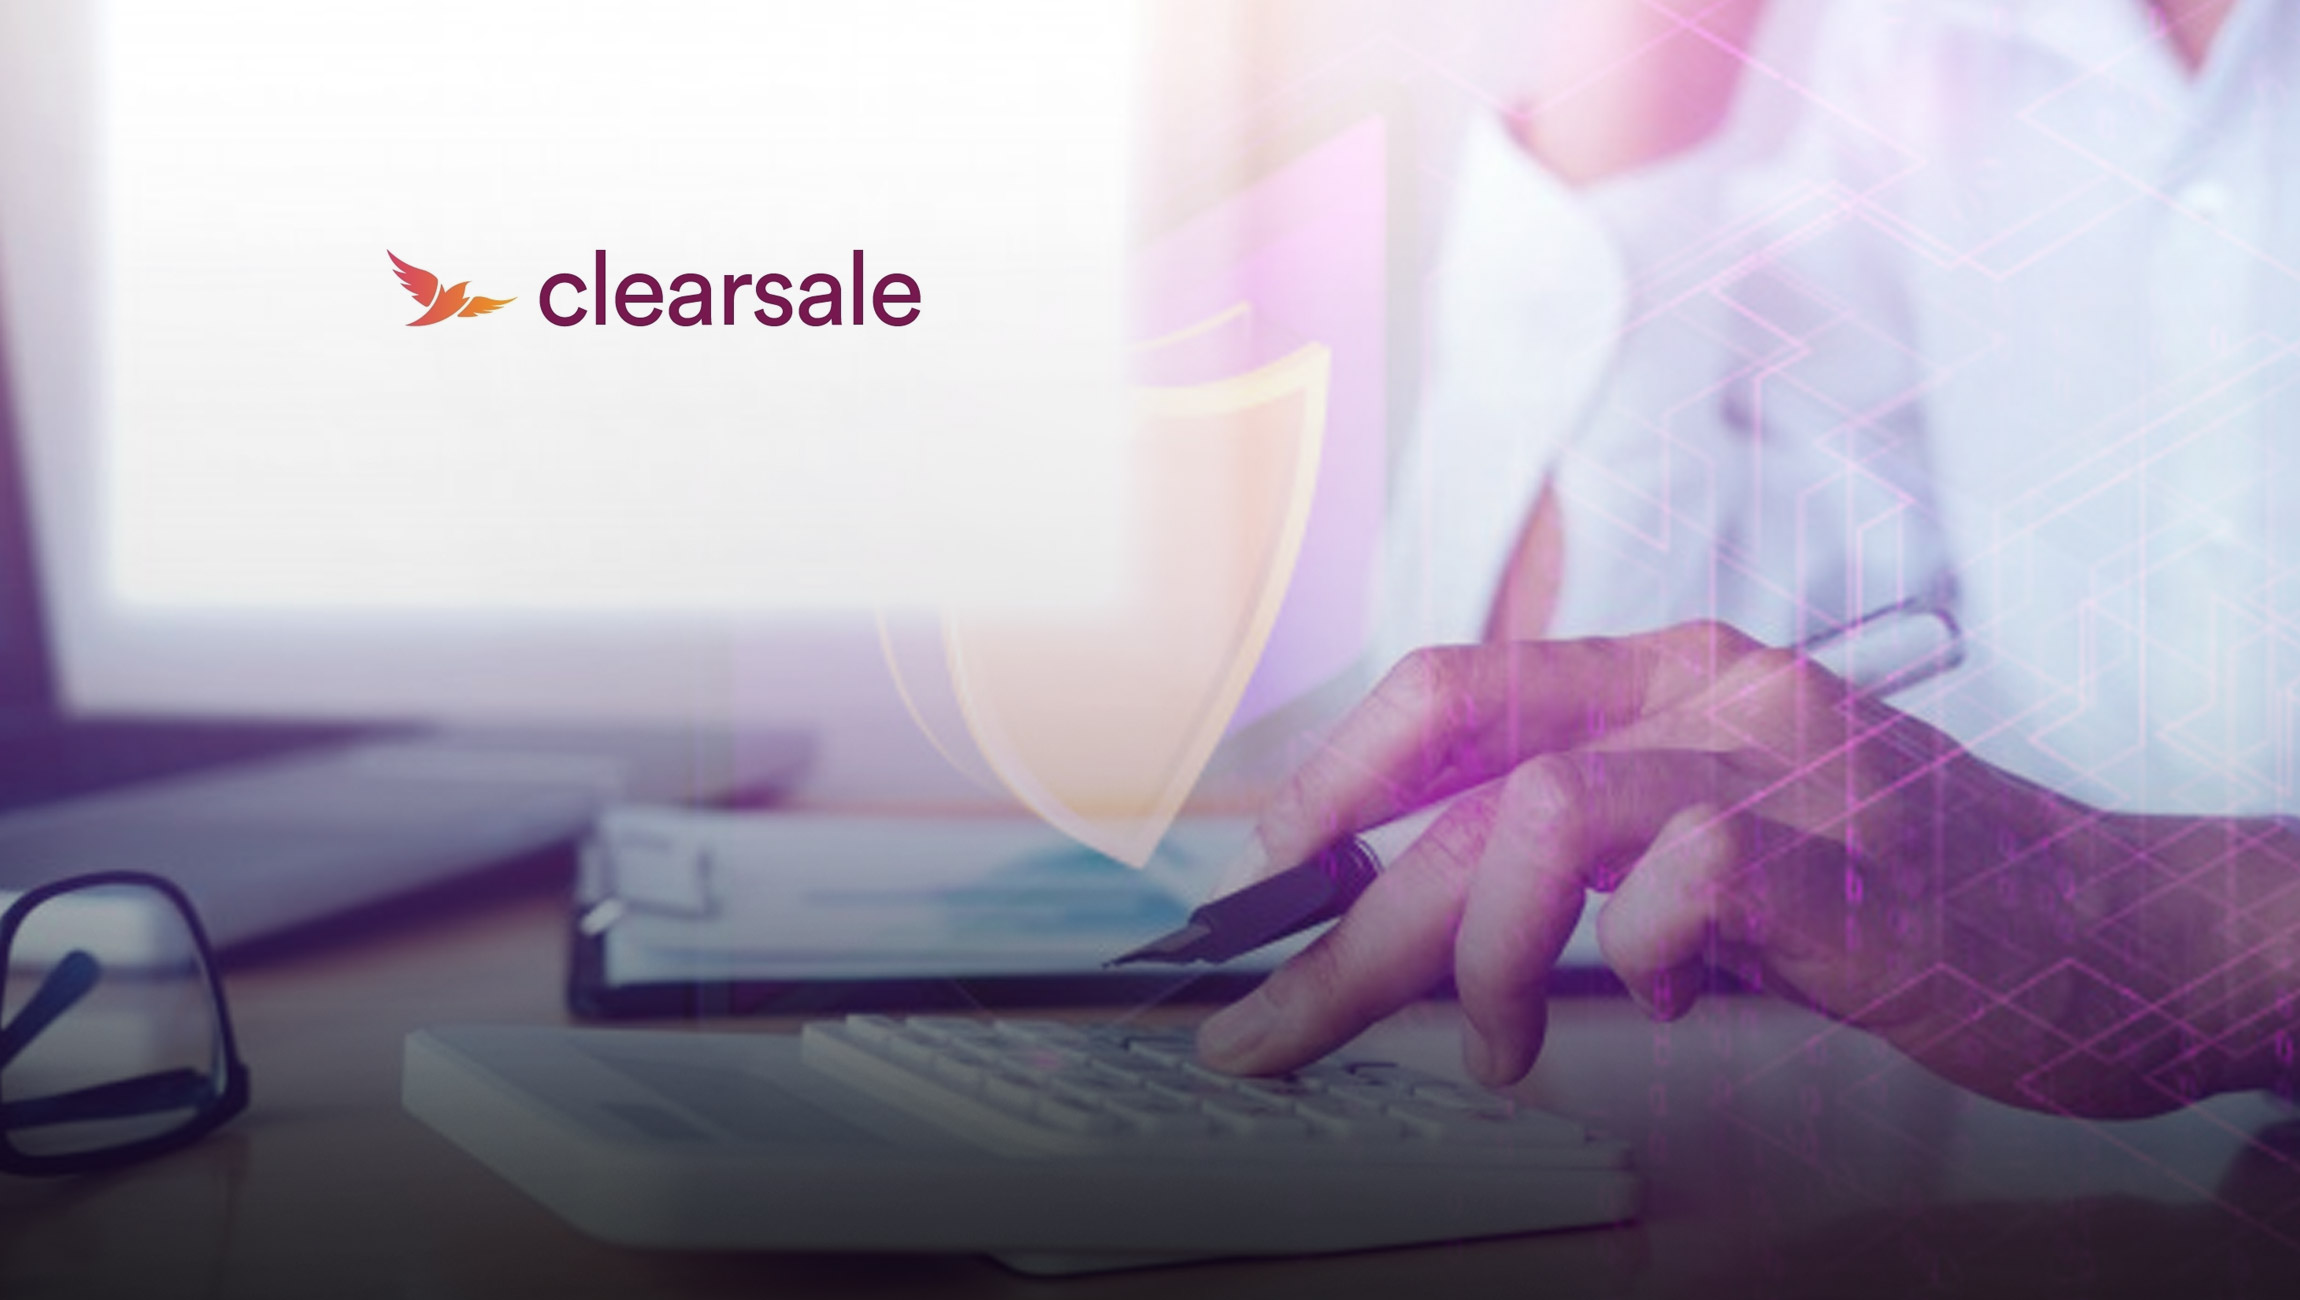 ClearSale Migration to Microsoft Azure Helps Increase Scalability and Performance in Fraud Protection